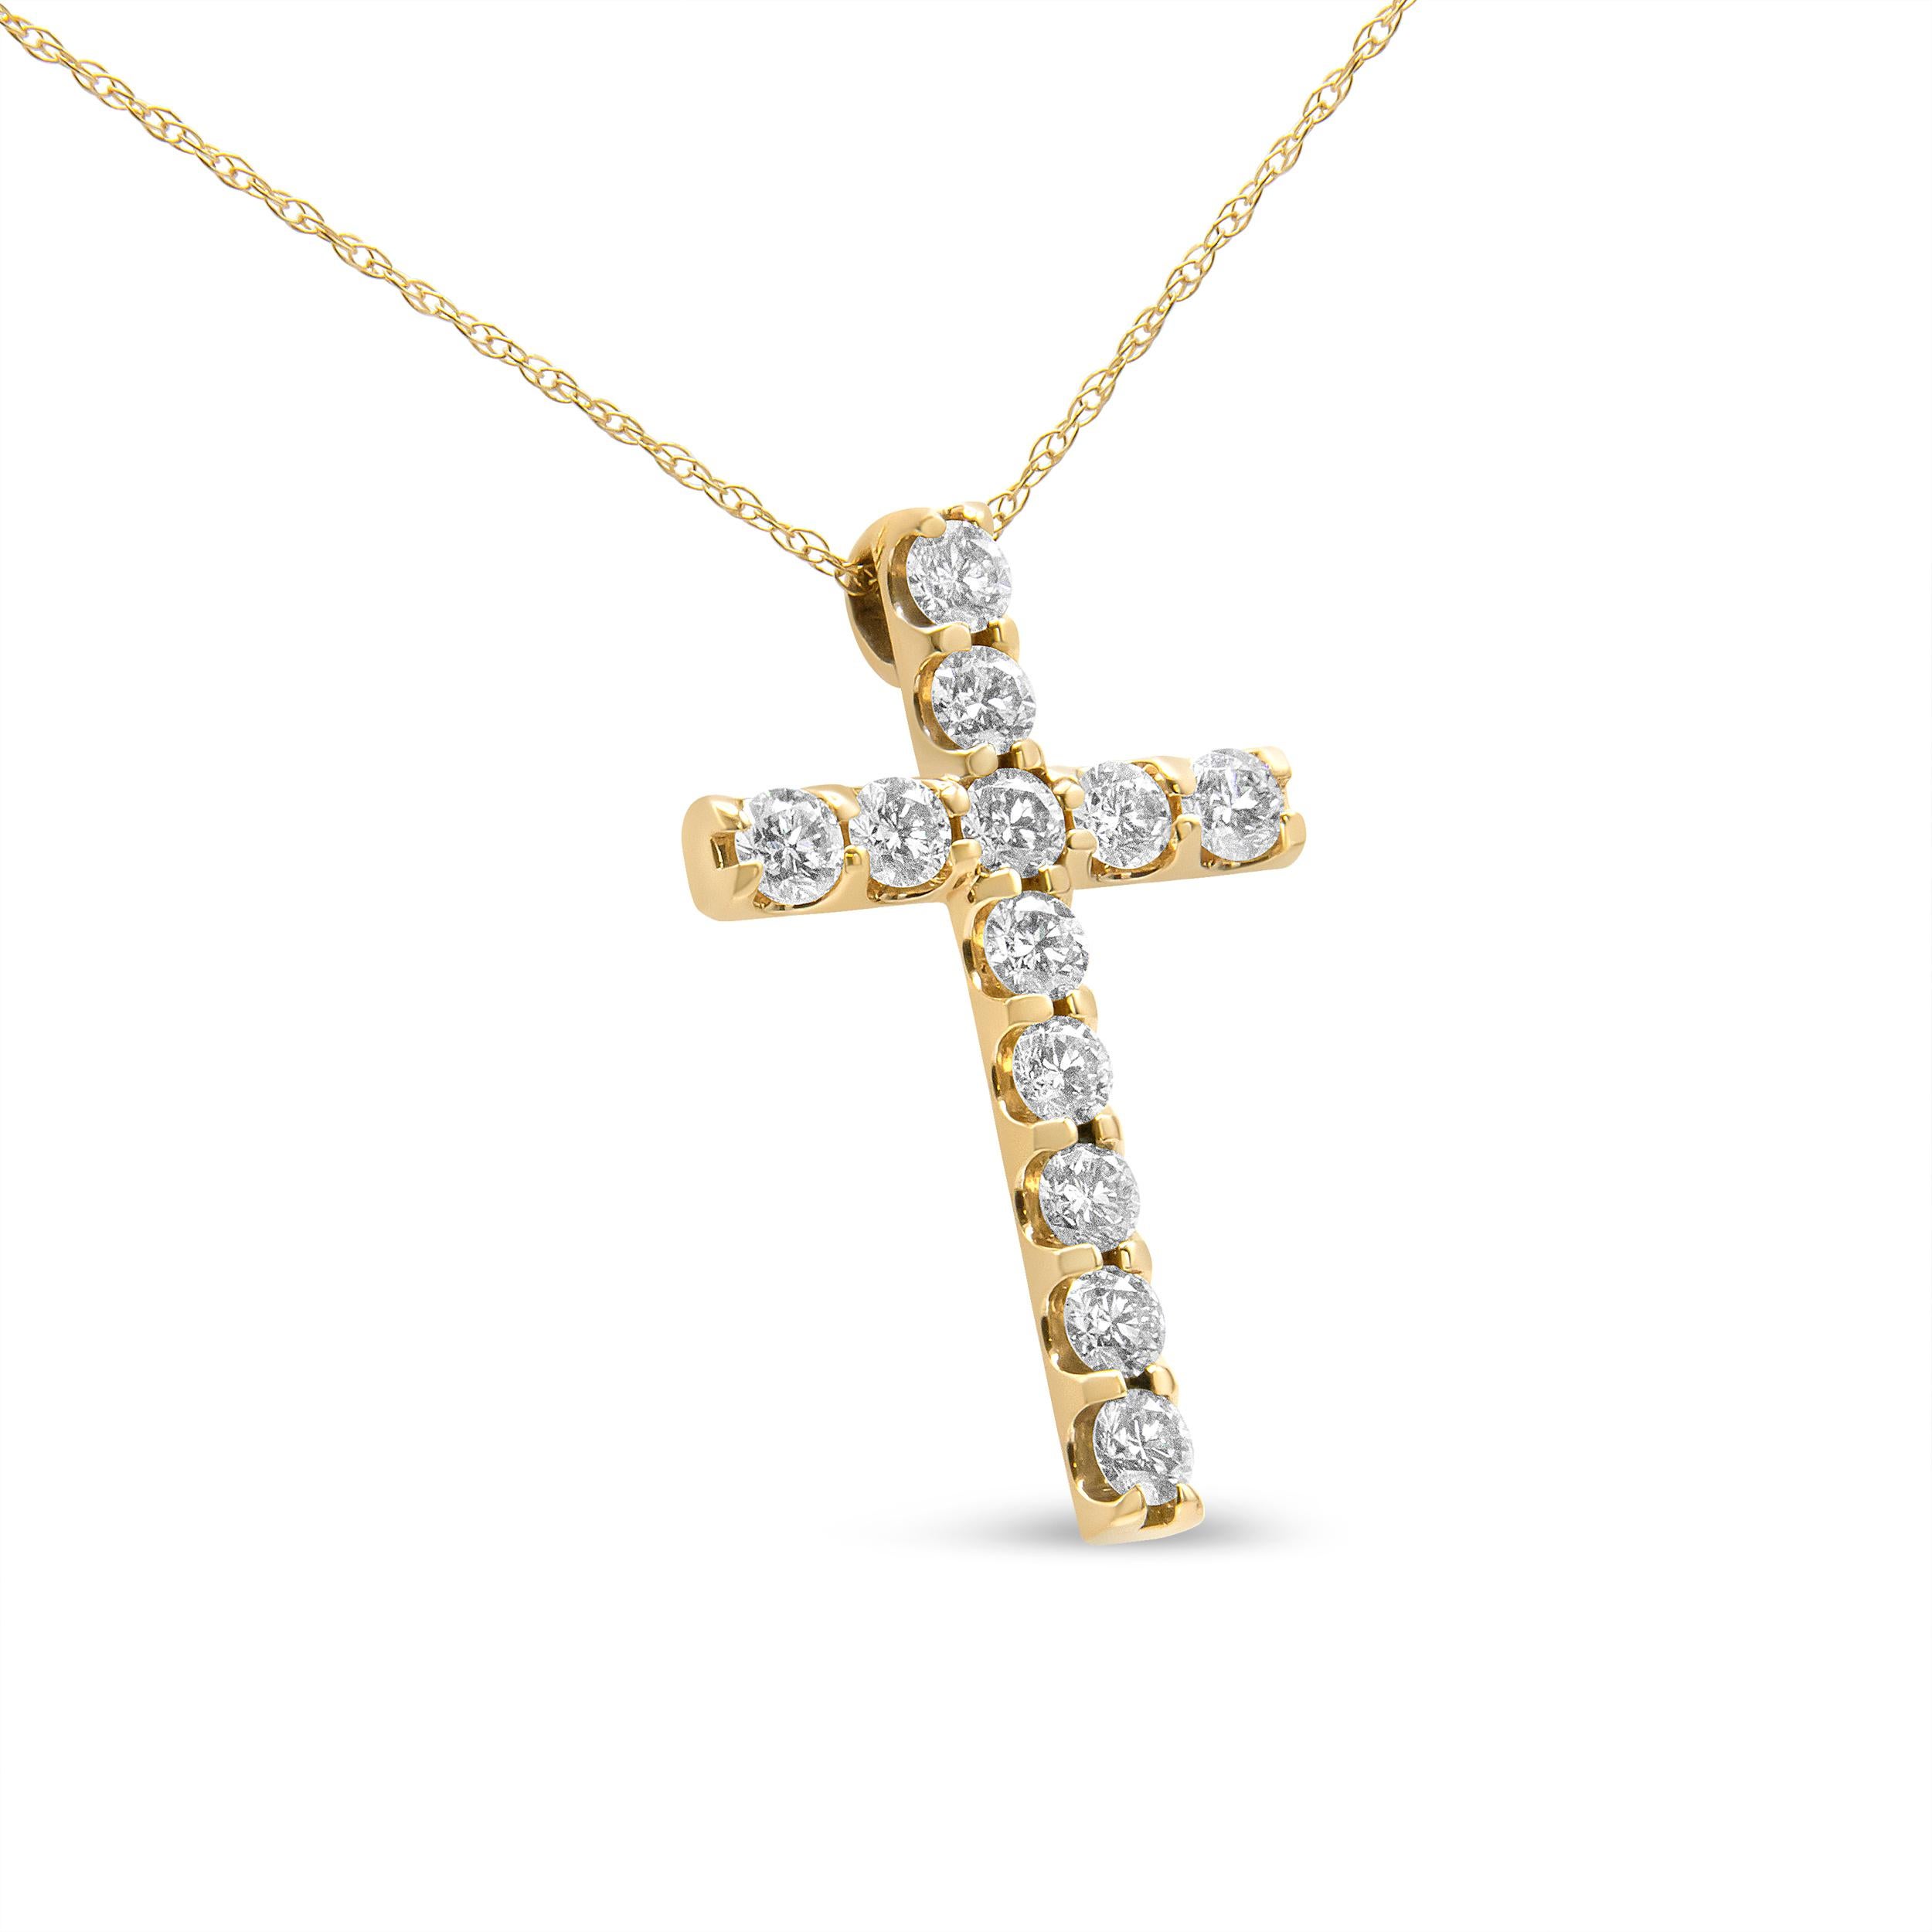 Showcase your inner devotion with this striking 1 1/10 c.t. diamond cross pendant necklace. The pendant is crafted in 14k yellow gold, a metal that will stay tarnish free for decades to come. The cross motif is embellished with sparkling, natural